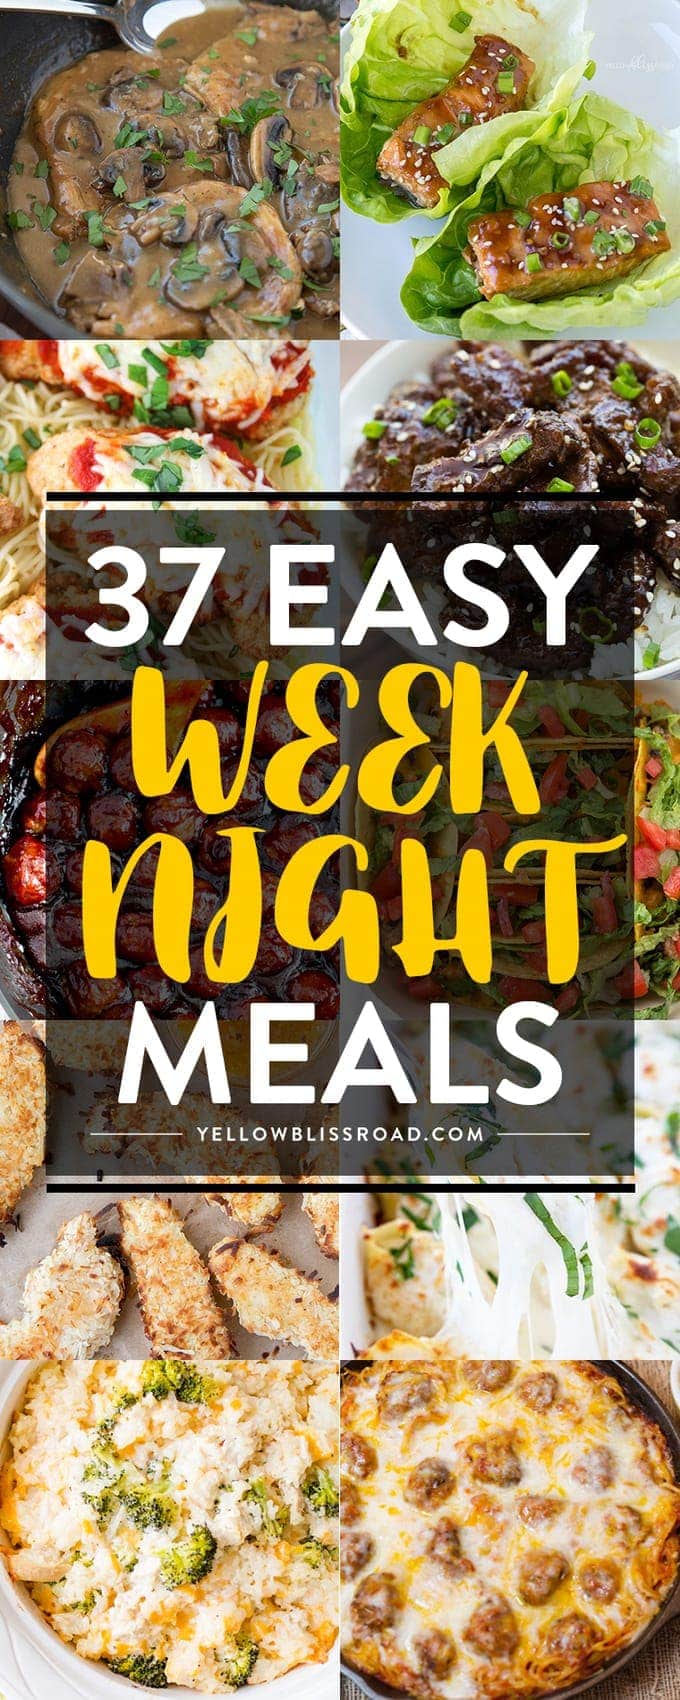 37 Easy Weeknight Meals - no chicken nuggets or fish sticks here! These meals are easy enough for busy weeknight dinners - lots of slow cooker recipes and 30 minute meals!